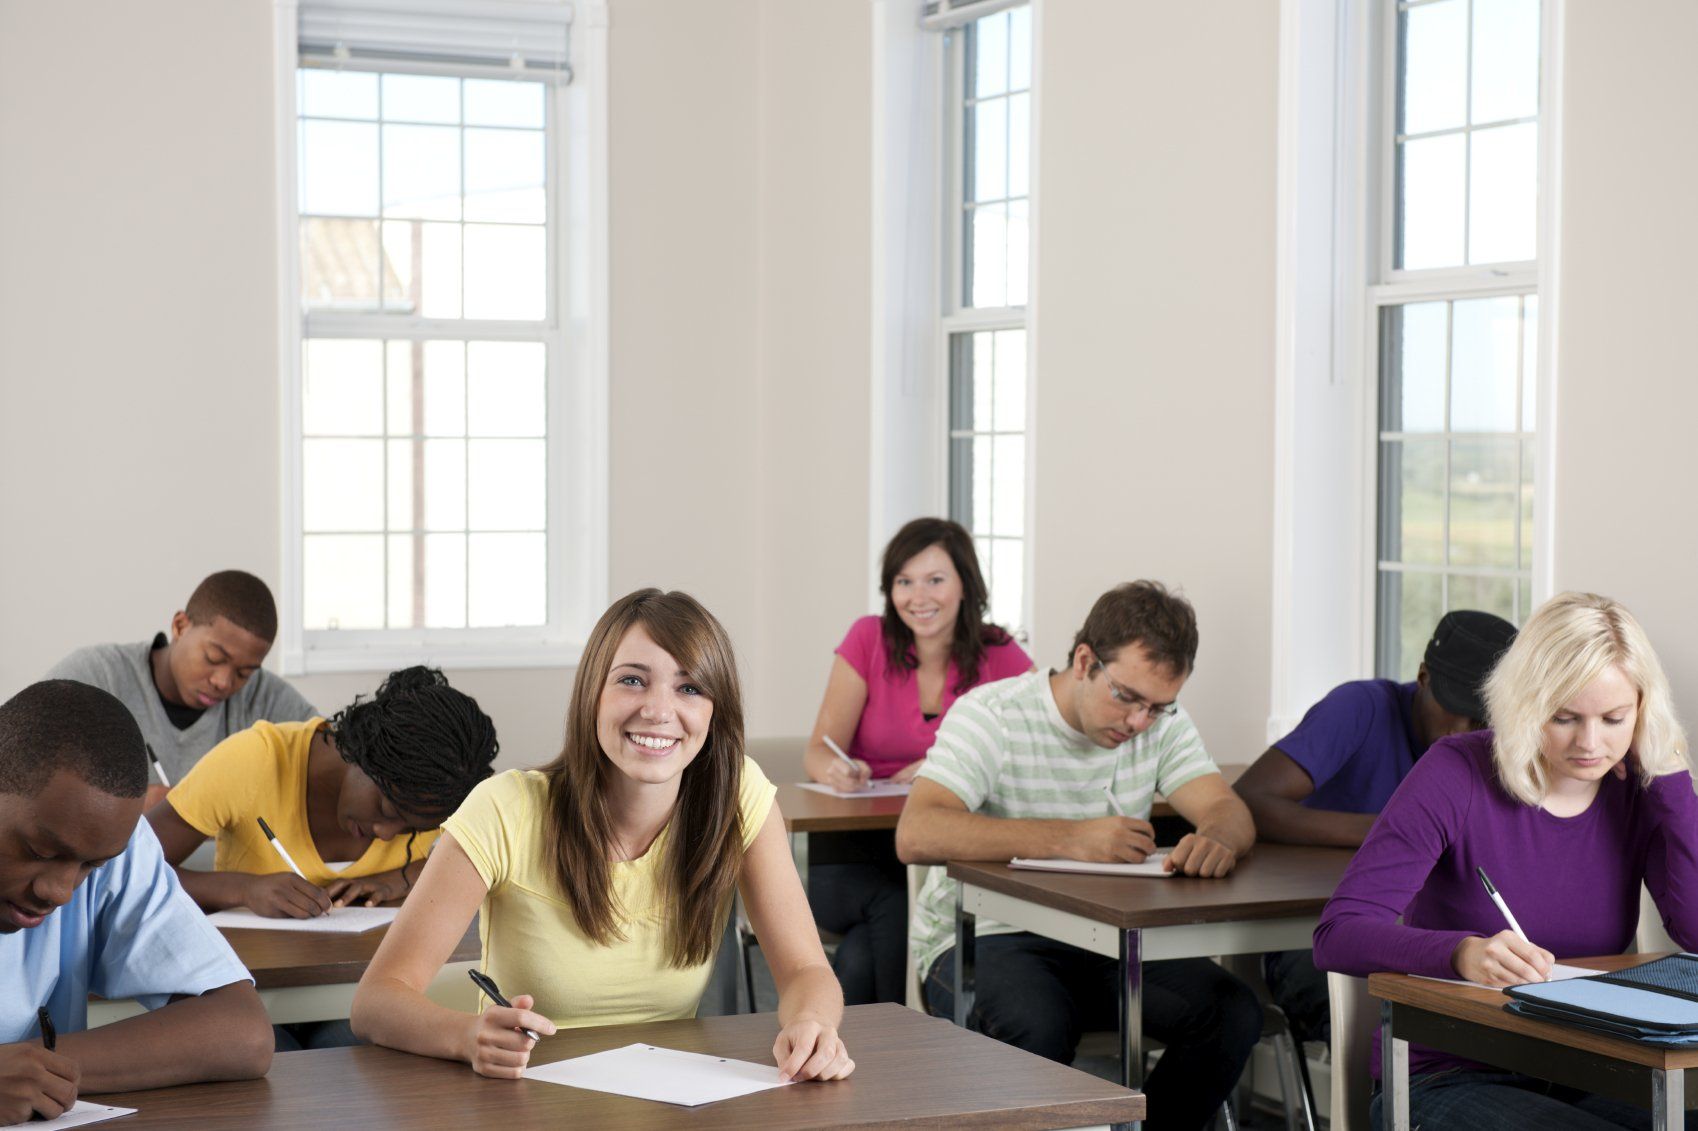 Eight students doing an exam in a classroom